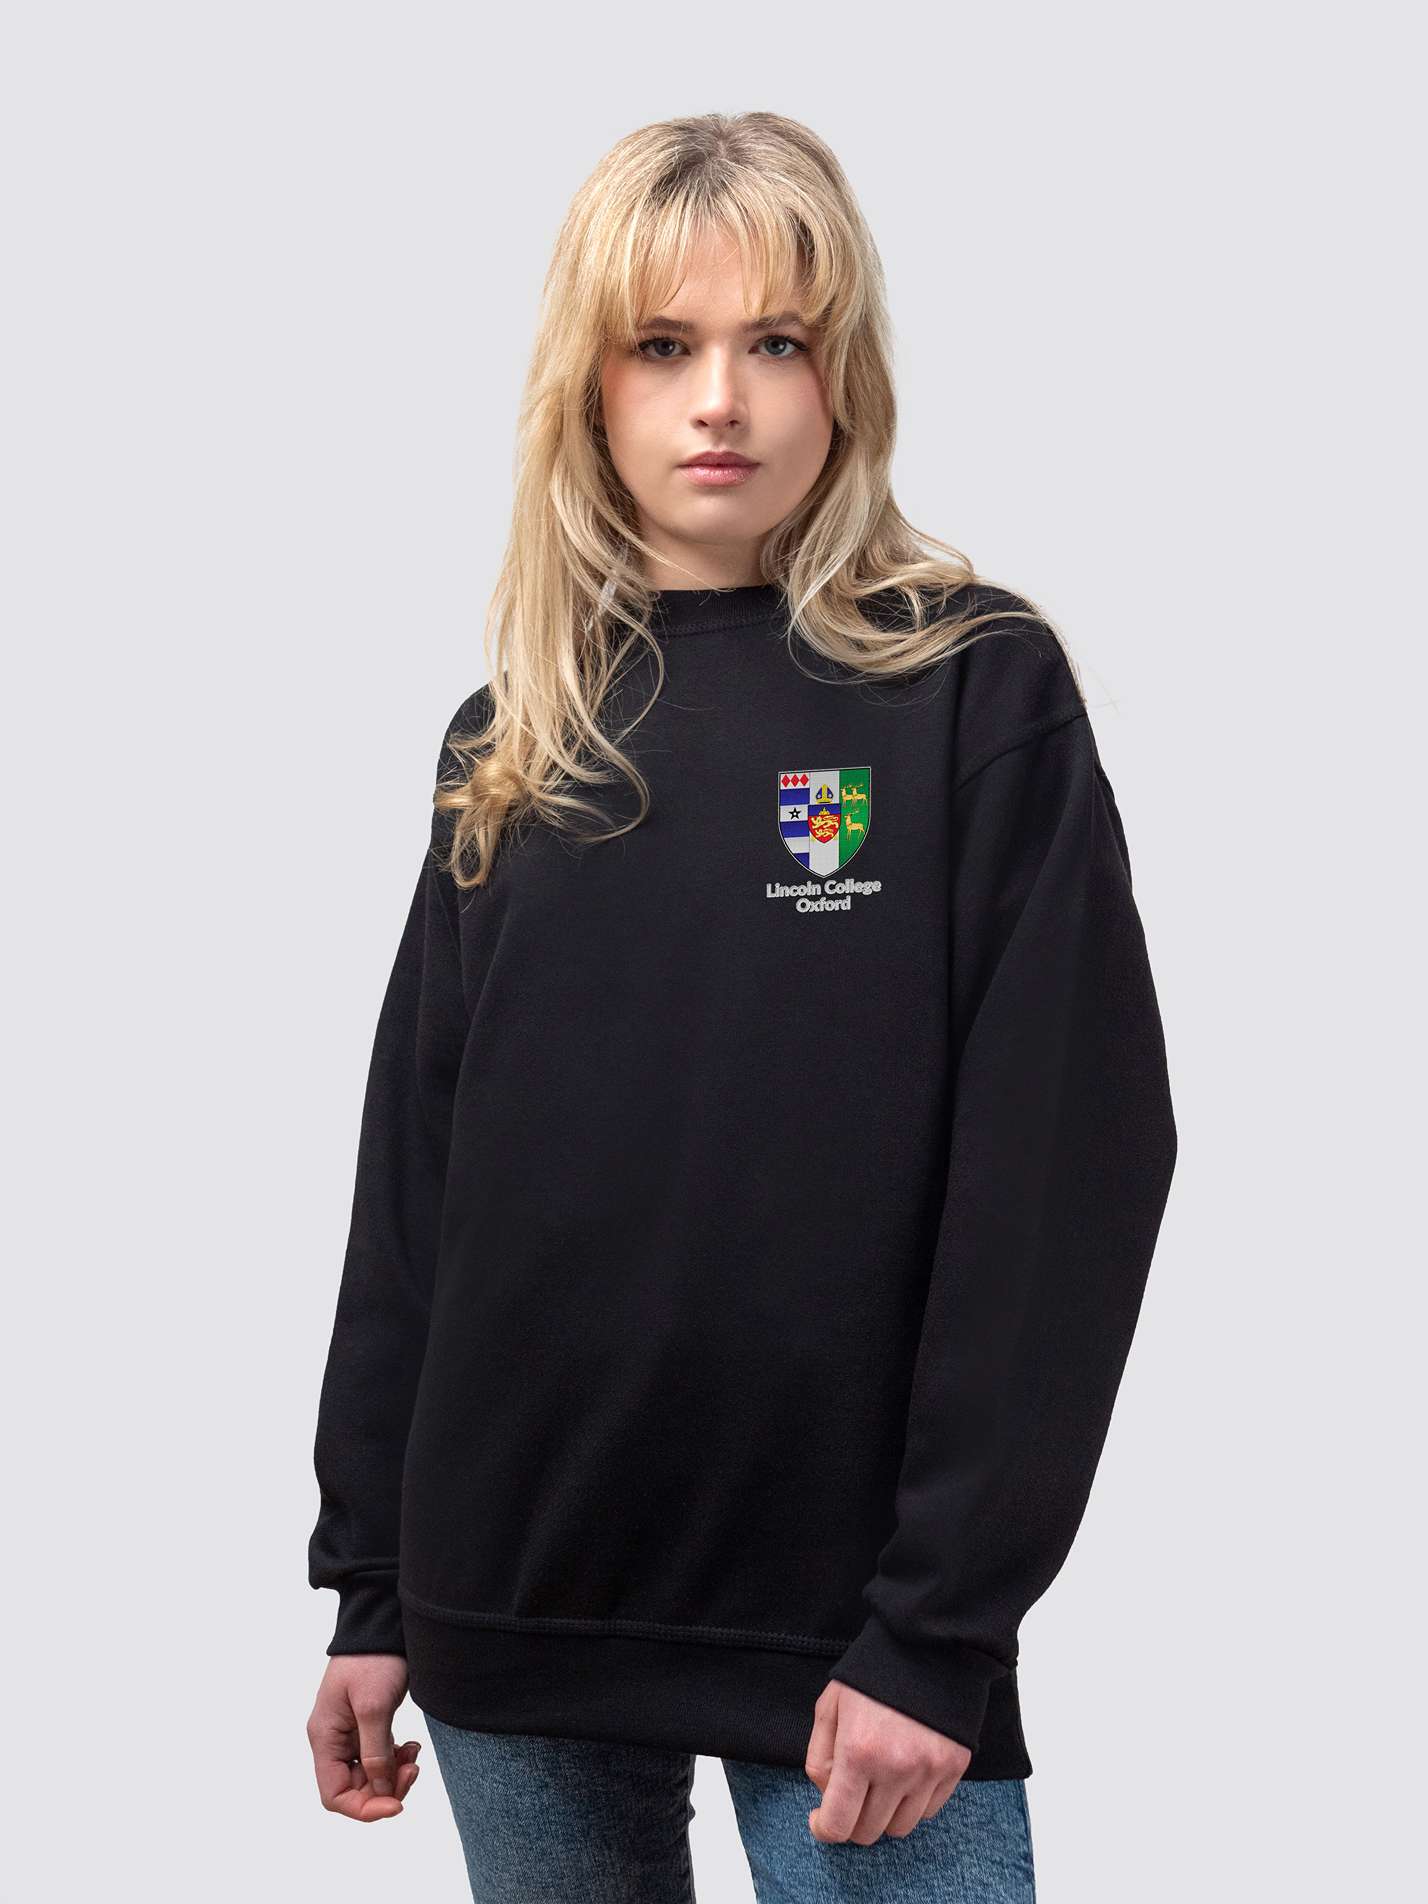 Lincoln crest on the front of a black, crew-neck sweatshirt